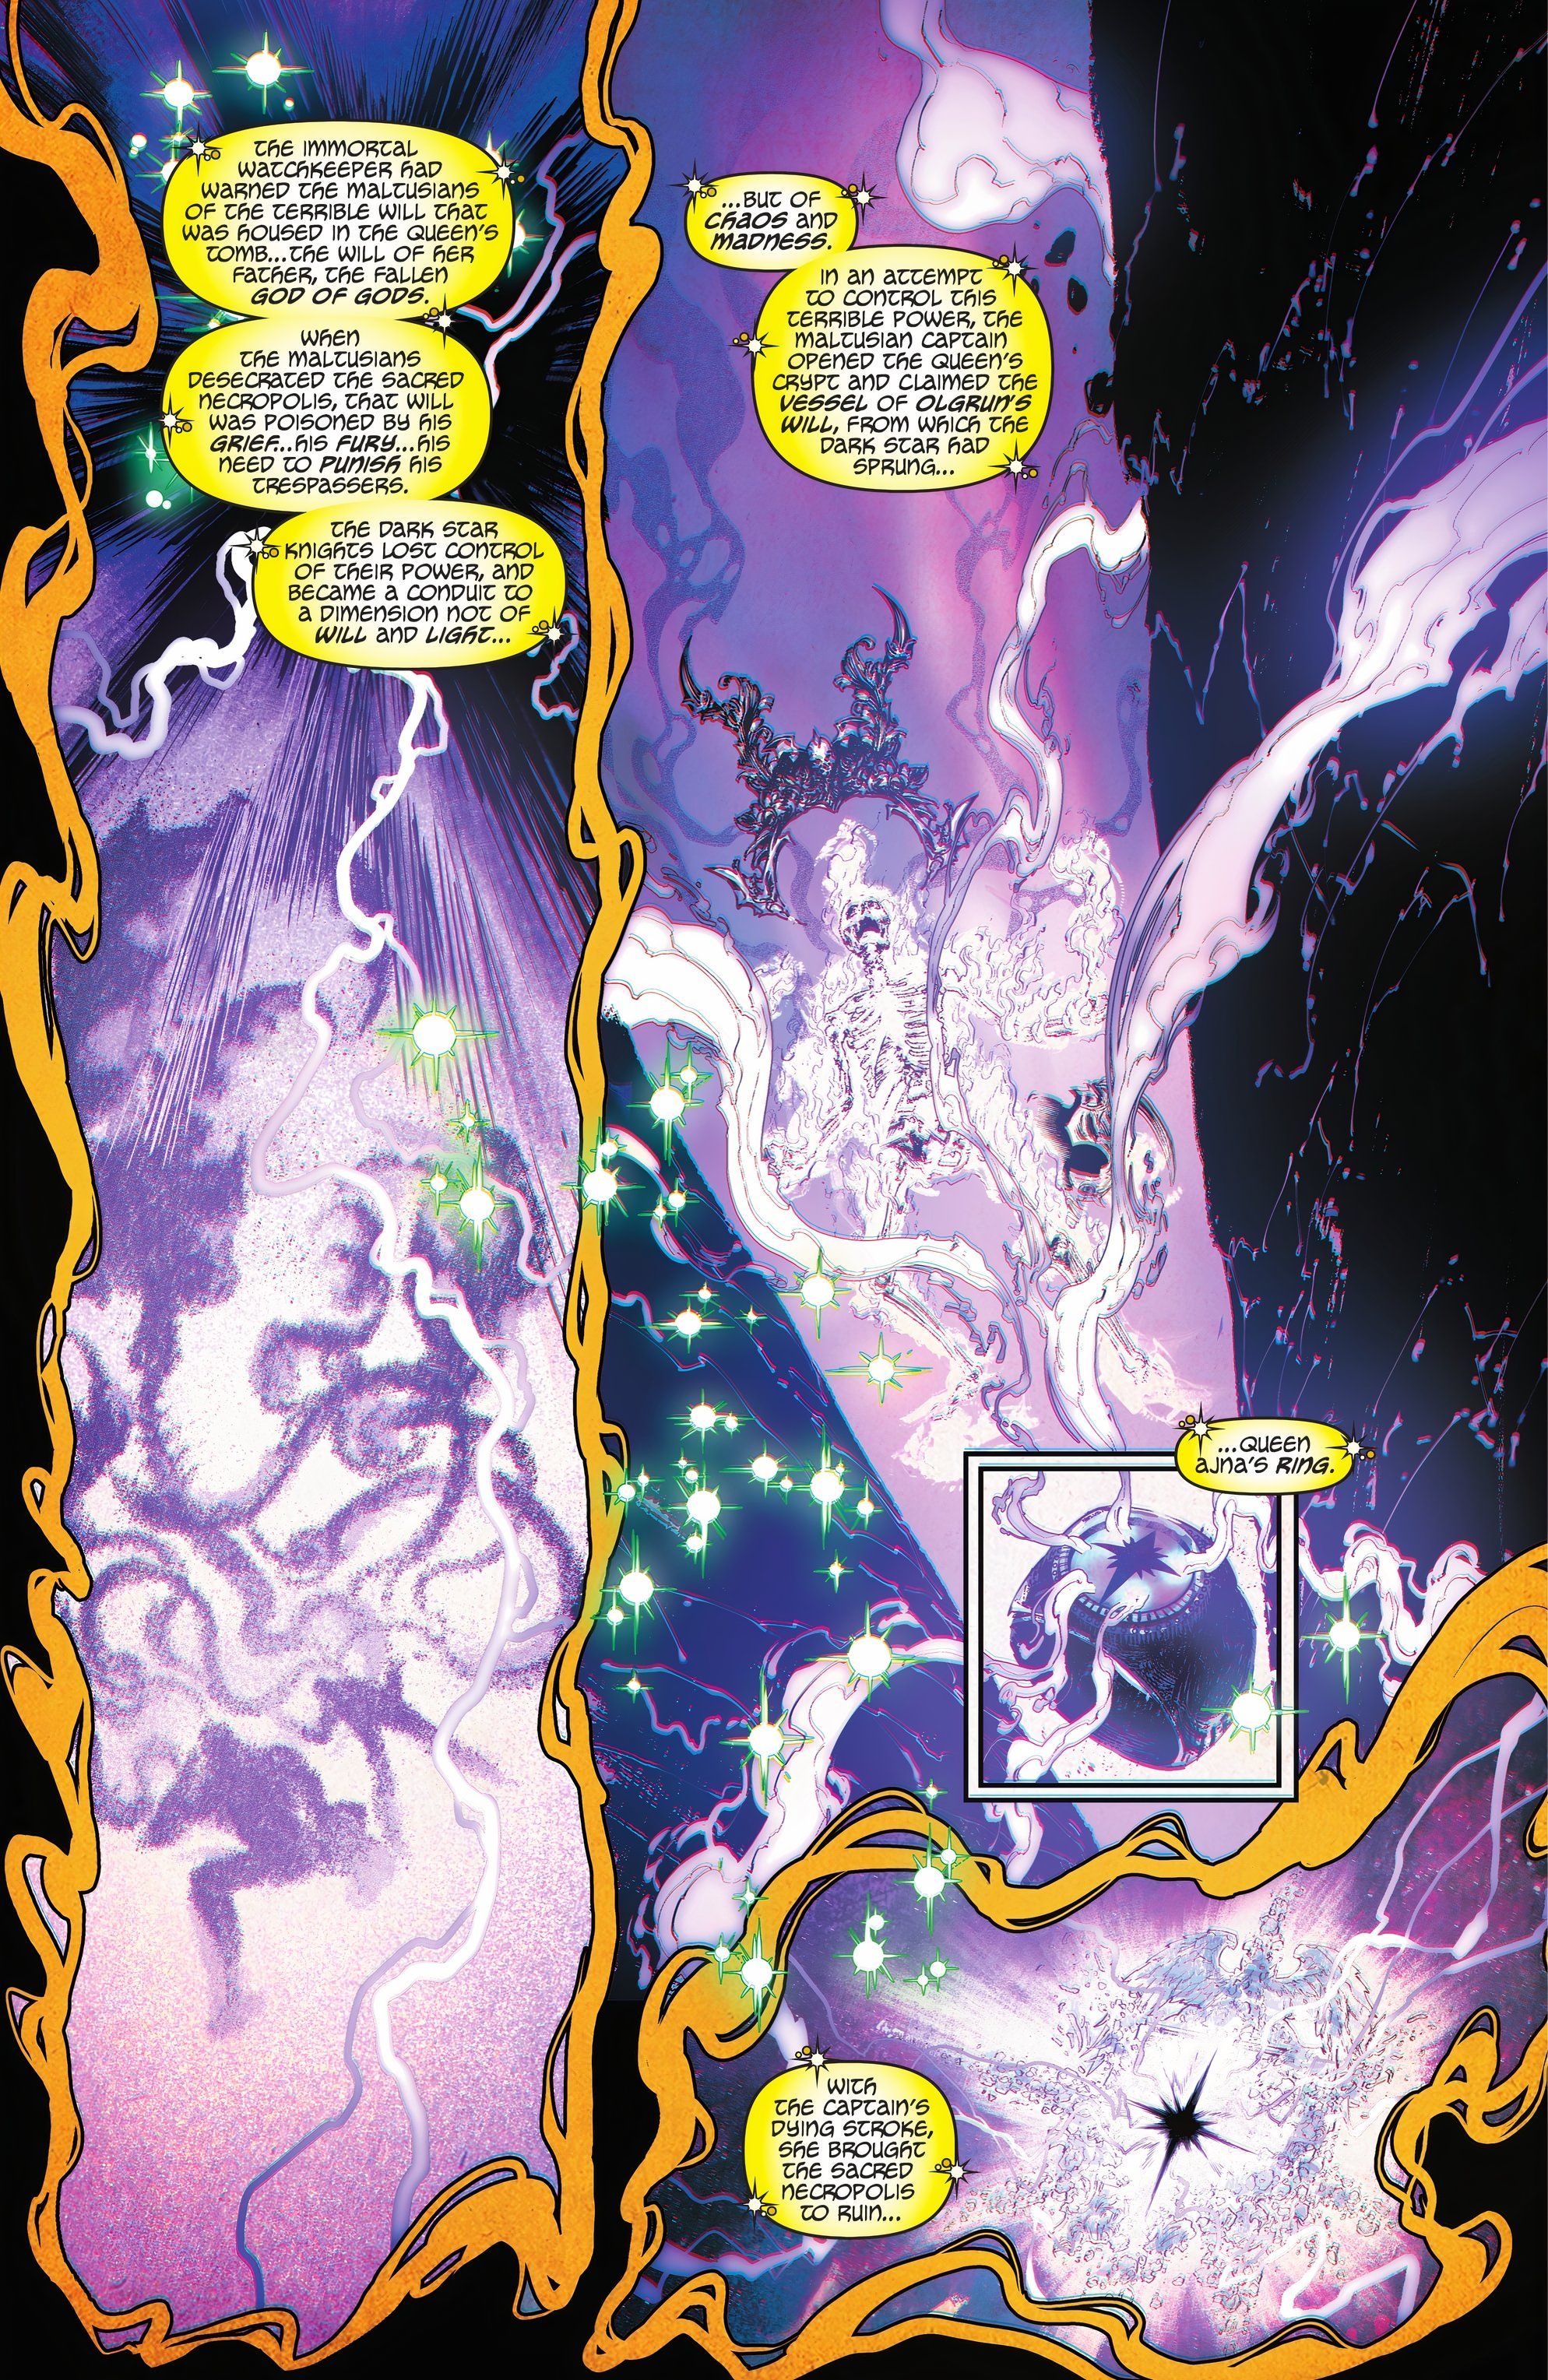 Green Lantern's Magic Upgrade Gives His Ring a Bizarre New Power